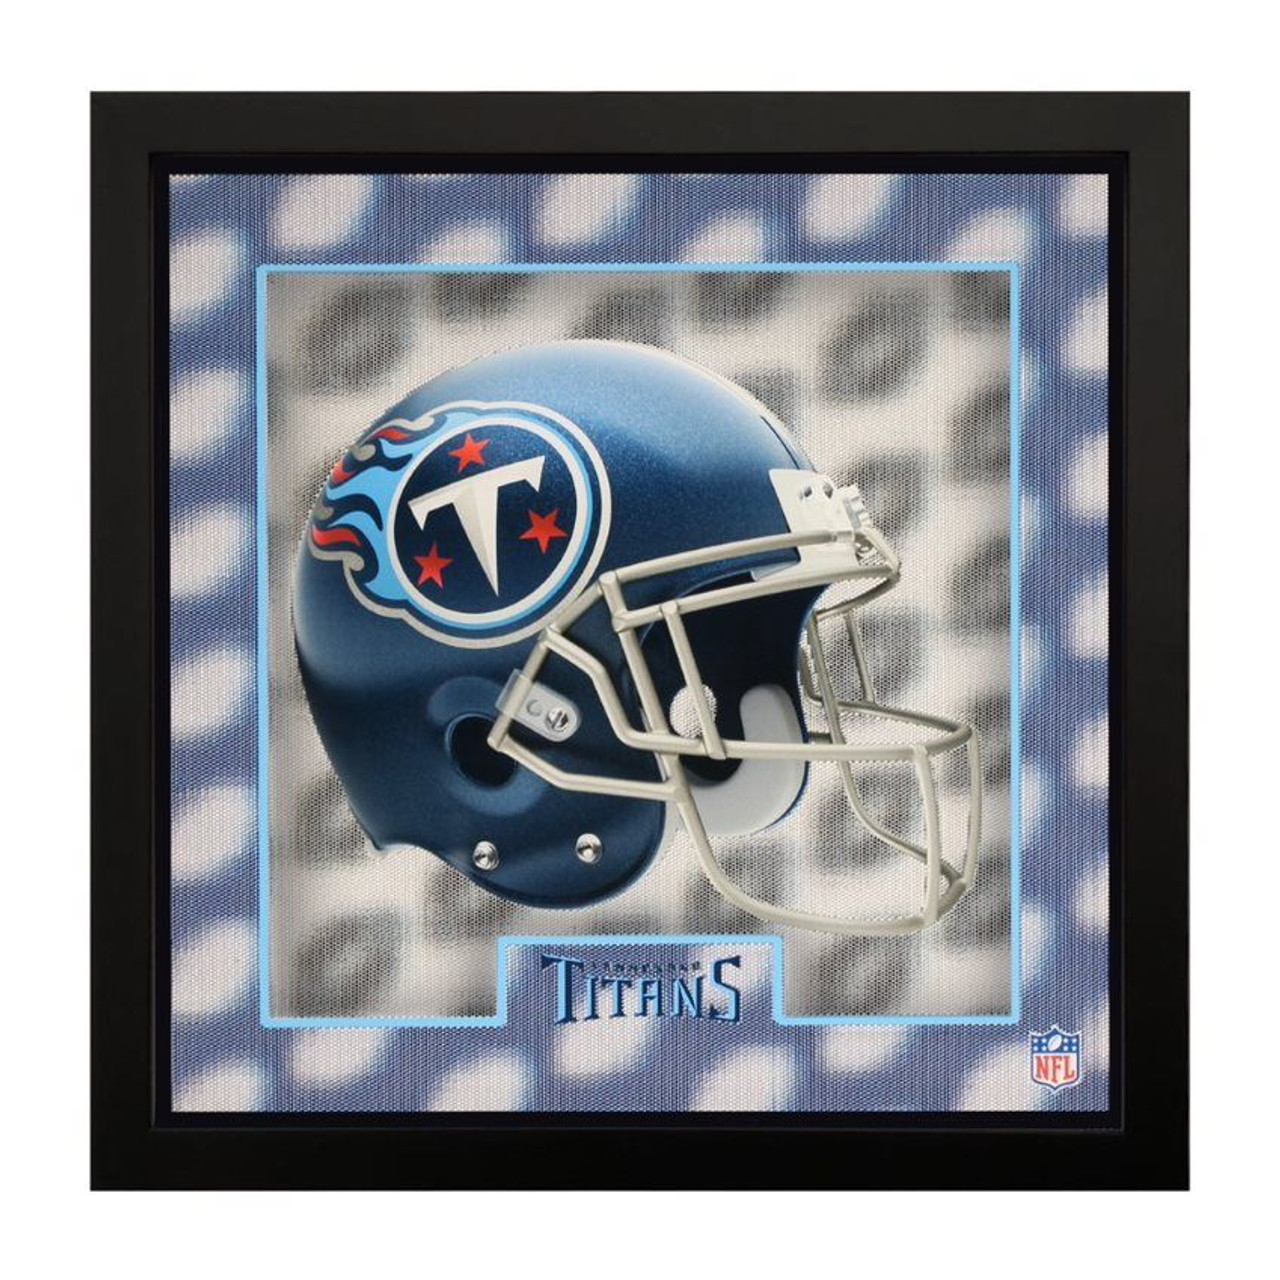 Tennessee, TEN, Titans, 5D, Holographic, Wall, Art, 12"x12", NFL, Imperial, 720801139999,   588-1028